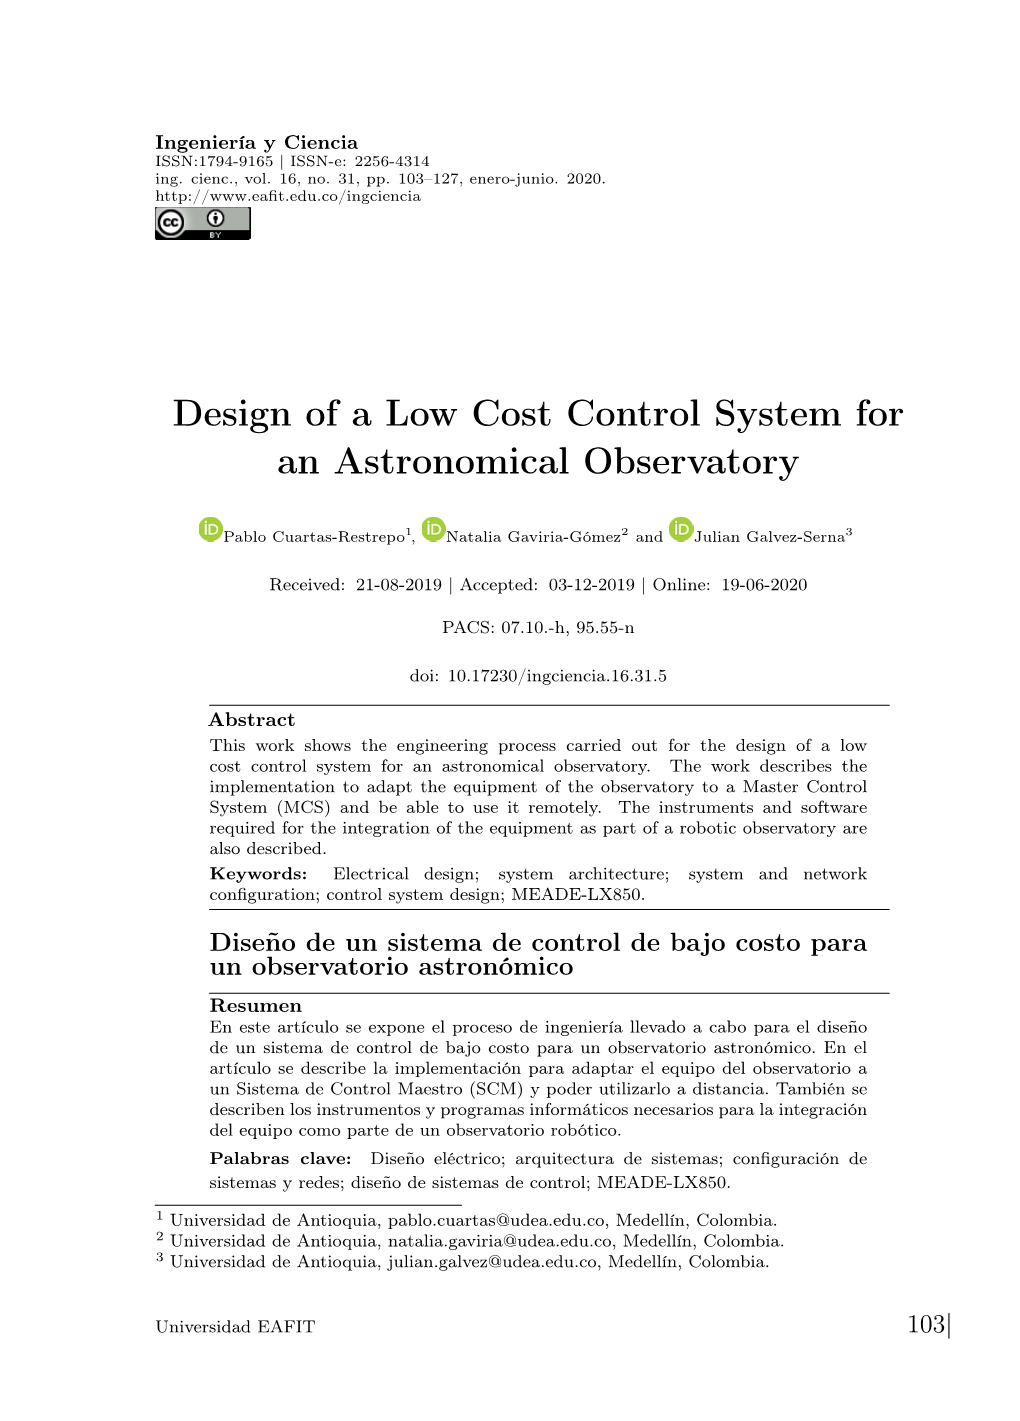 Design of a Low Cost Control System for an Astronomical Observatory